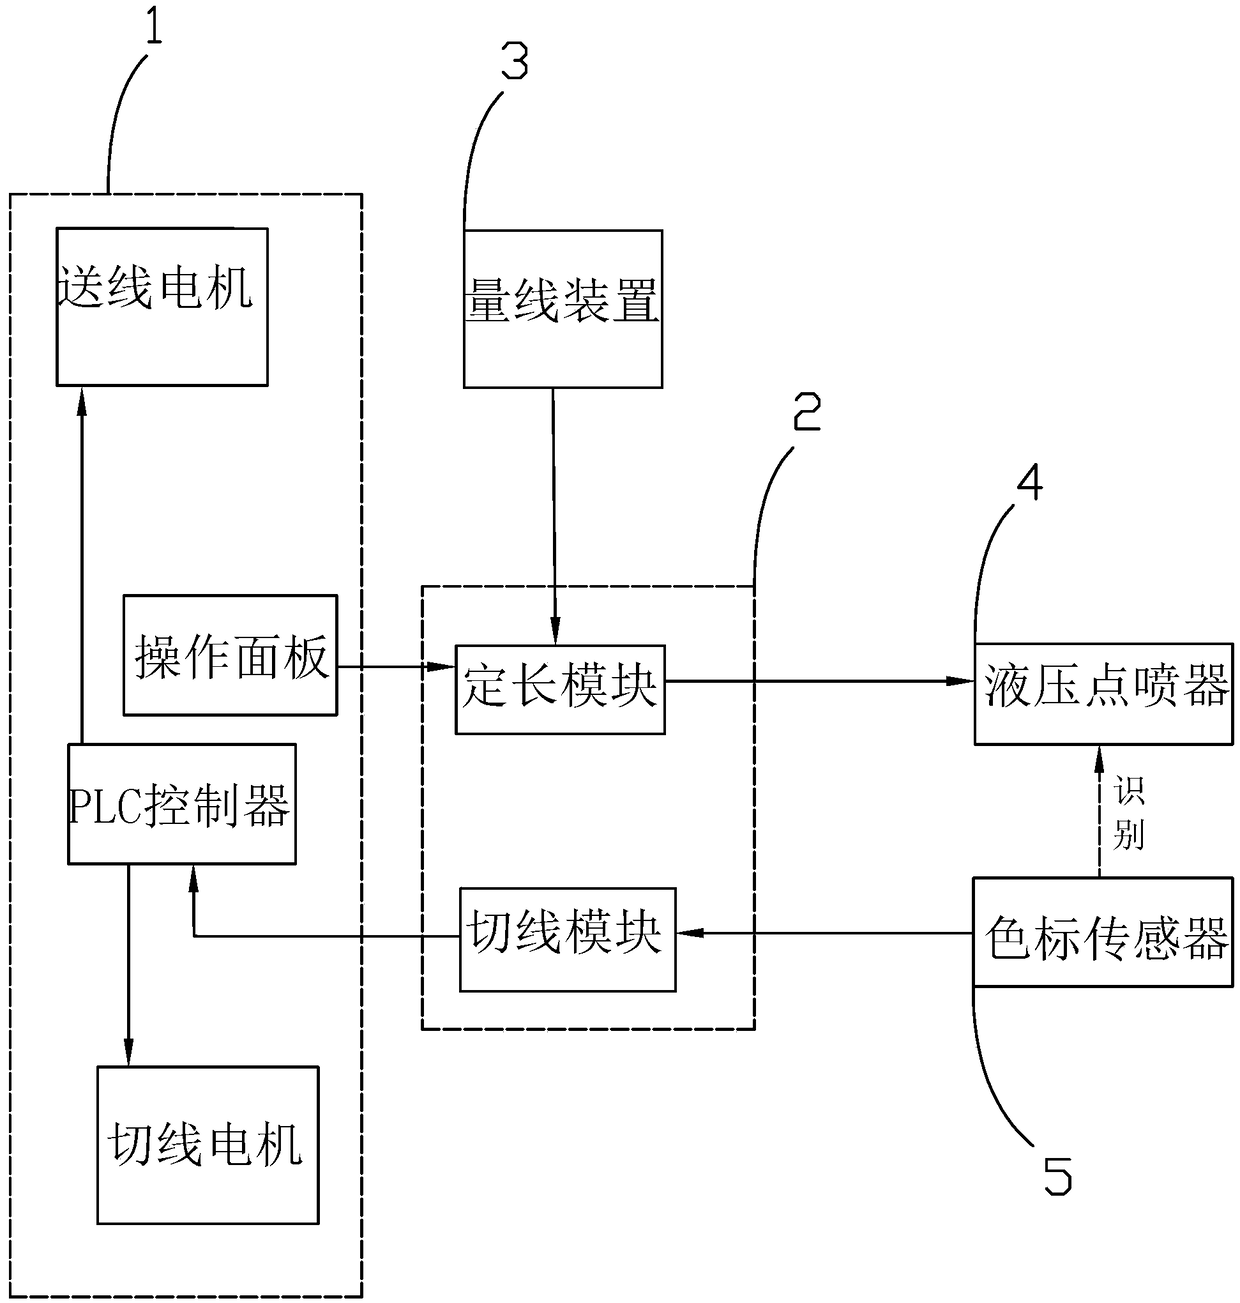 Information control system of numerical control manufacturing machine tool for assembling cables